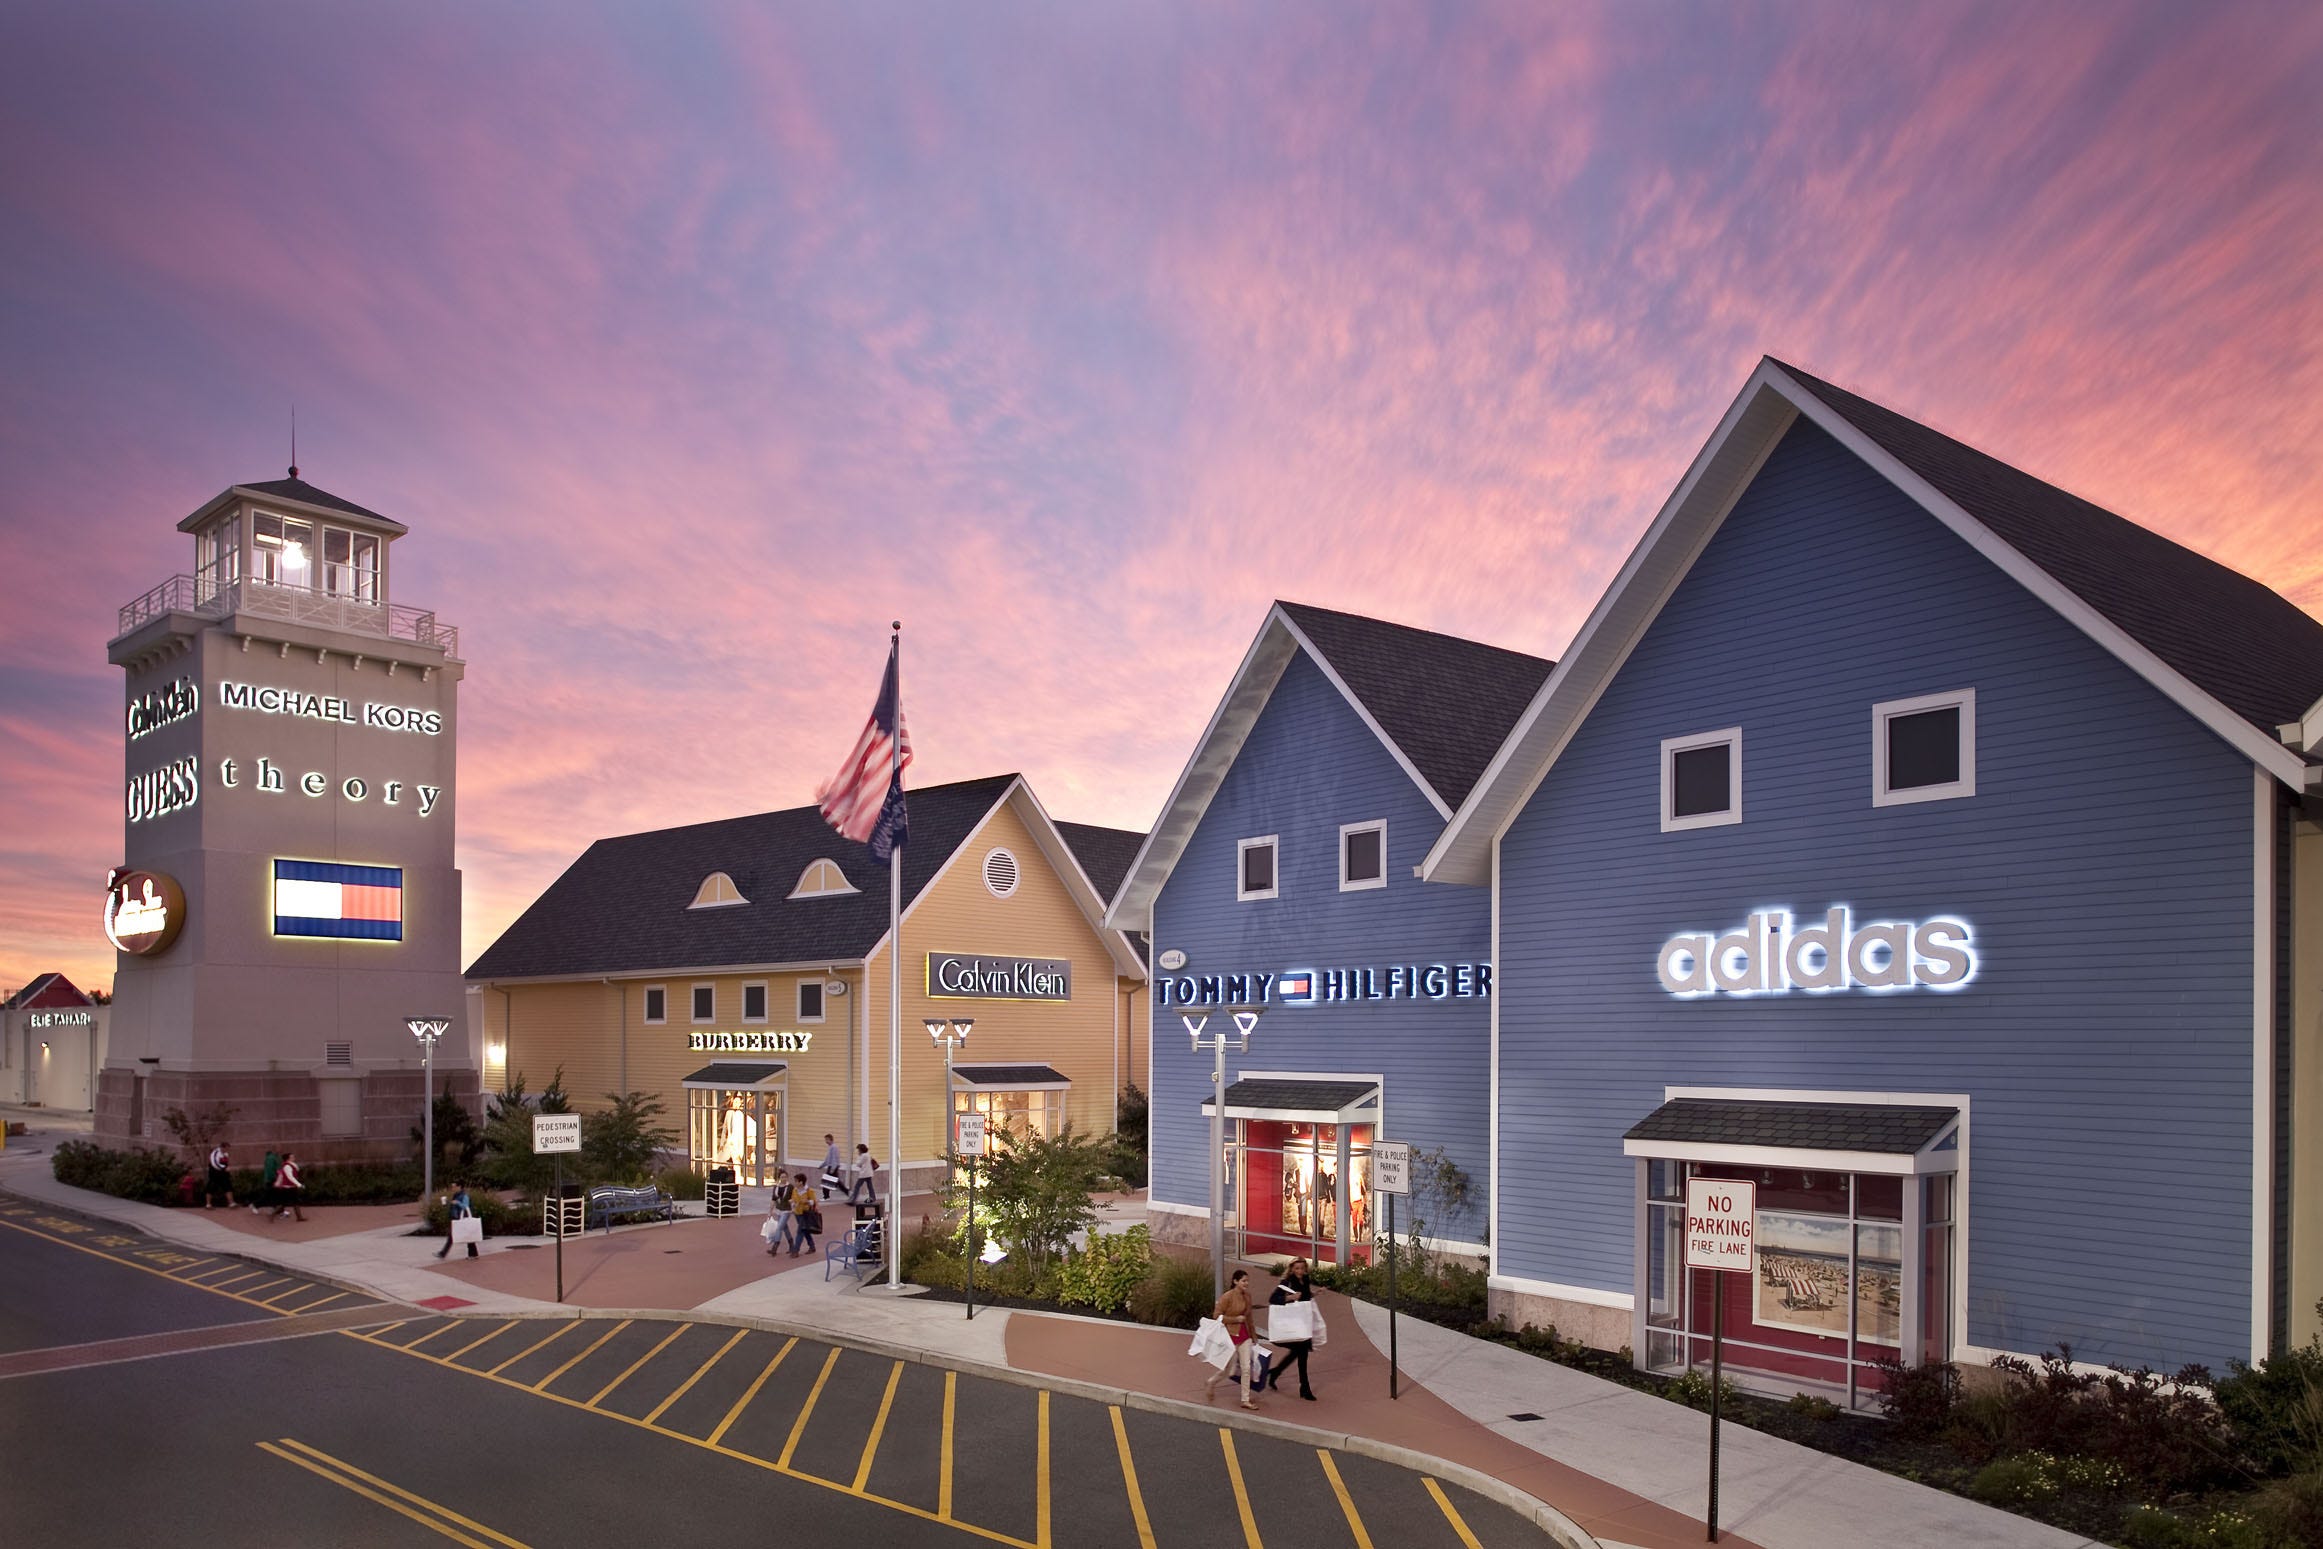 jersey shore premium outlet mall